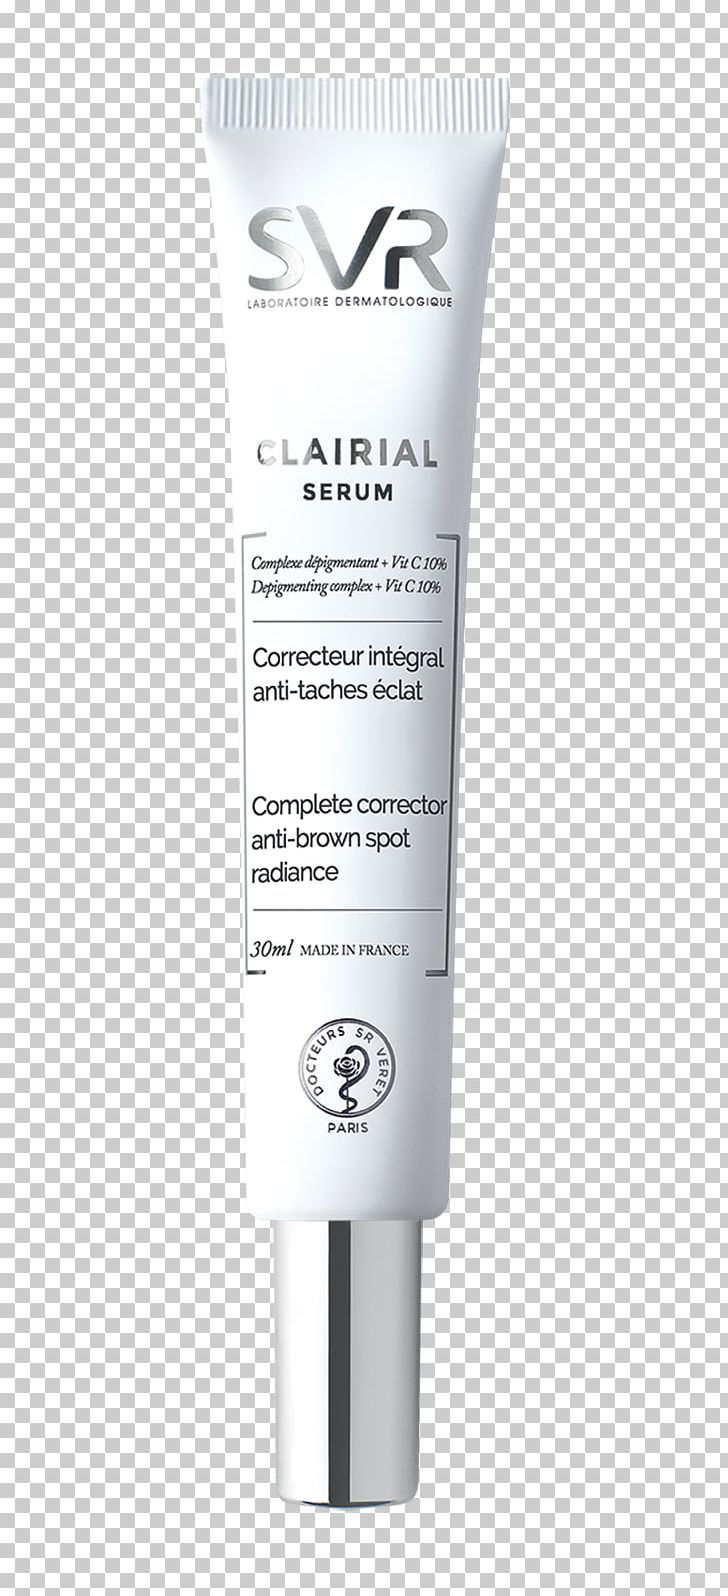 SVR CLARIAL 10 Cream Lotion Cosmetics Milliliter PNG, Clipart, Beauty, Cc Cream, Concealer, Cosmetics, Cream Free PNG Download